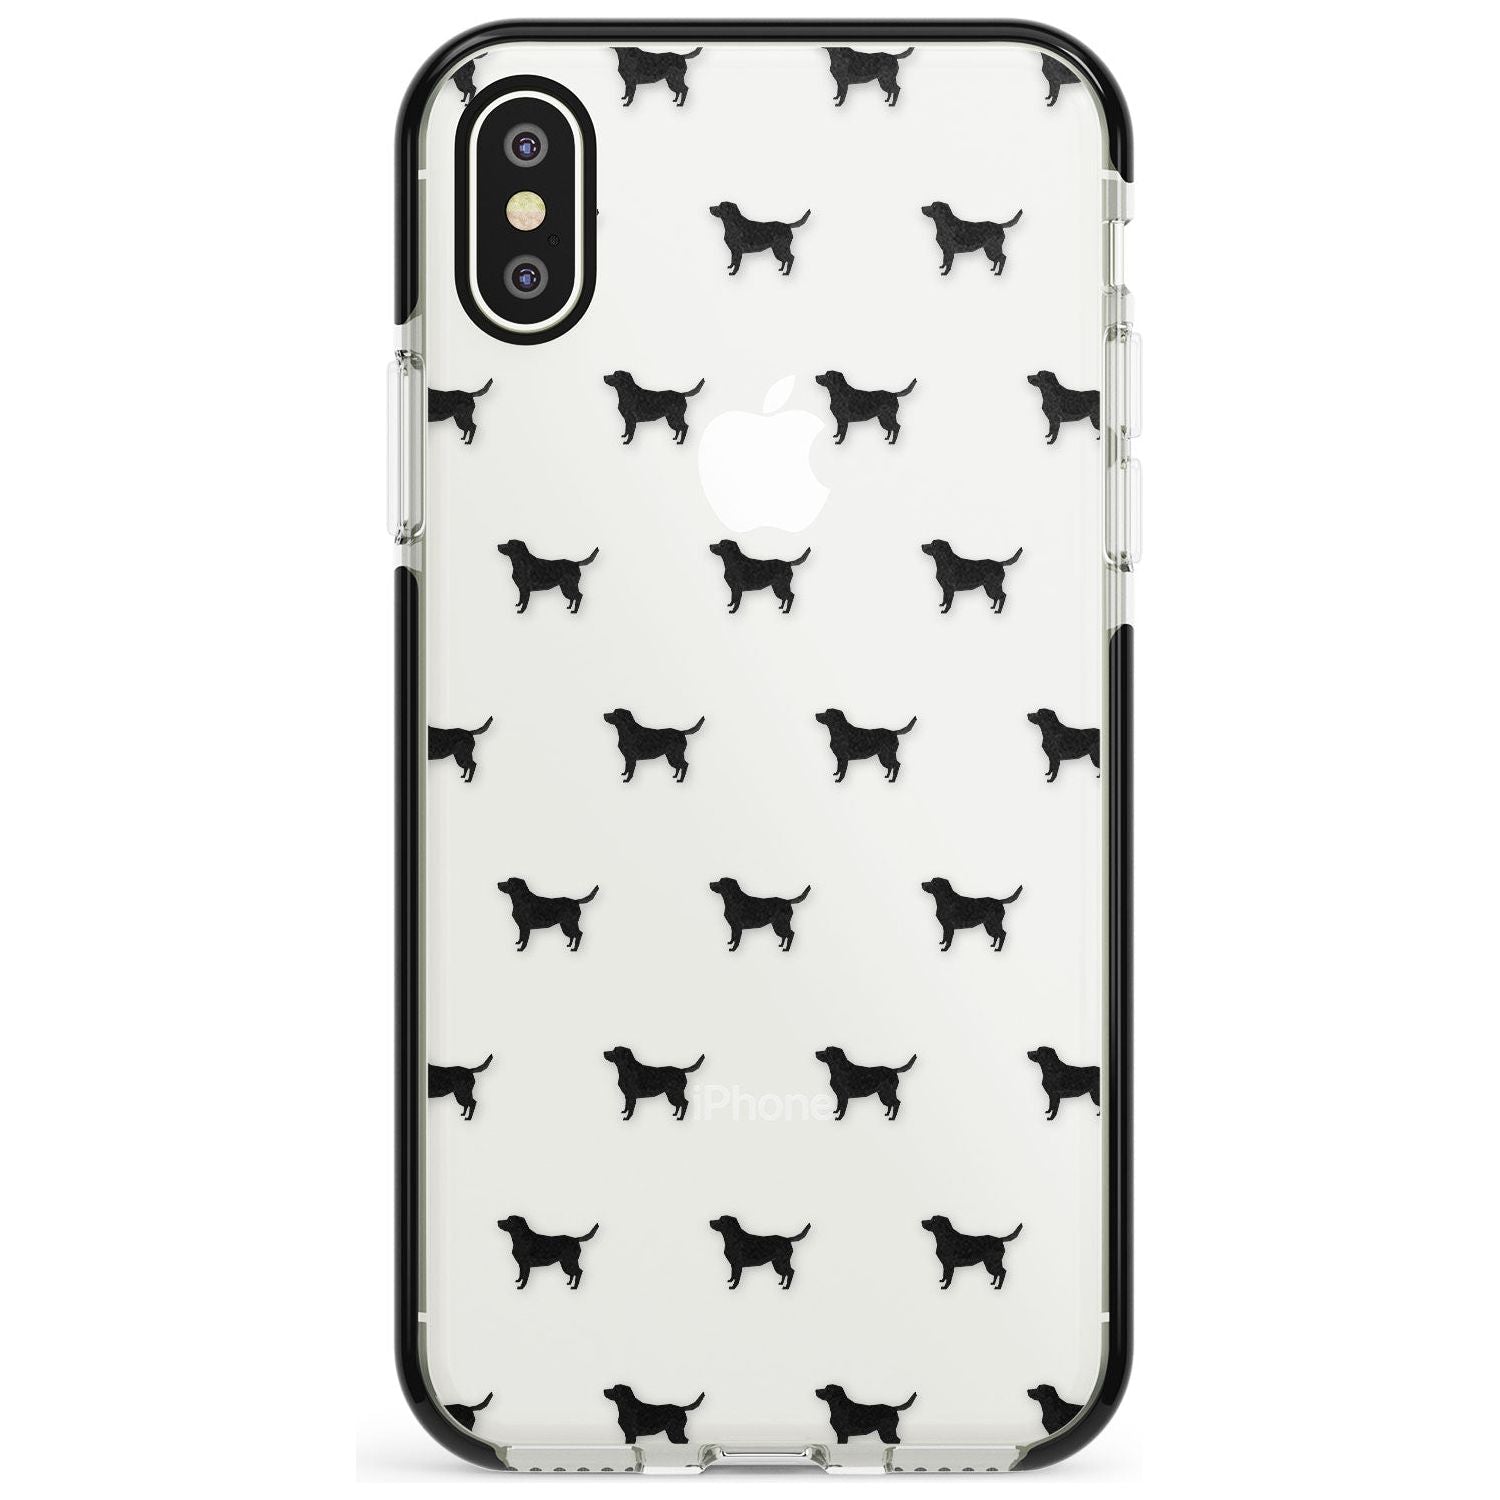 Black Labrador Dog Pattern Clear Black Impact Phone Case for iPhone X XS Max XR